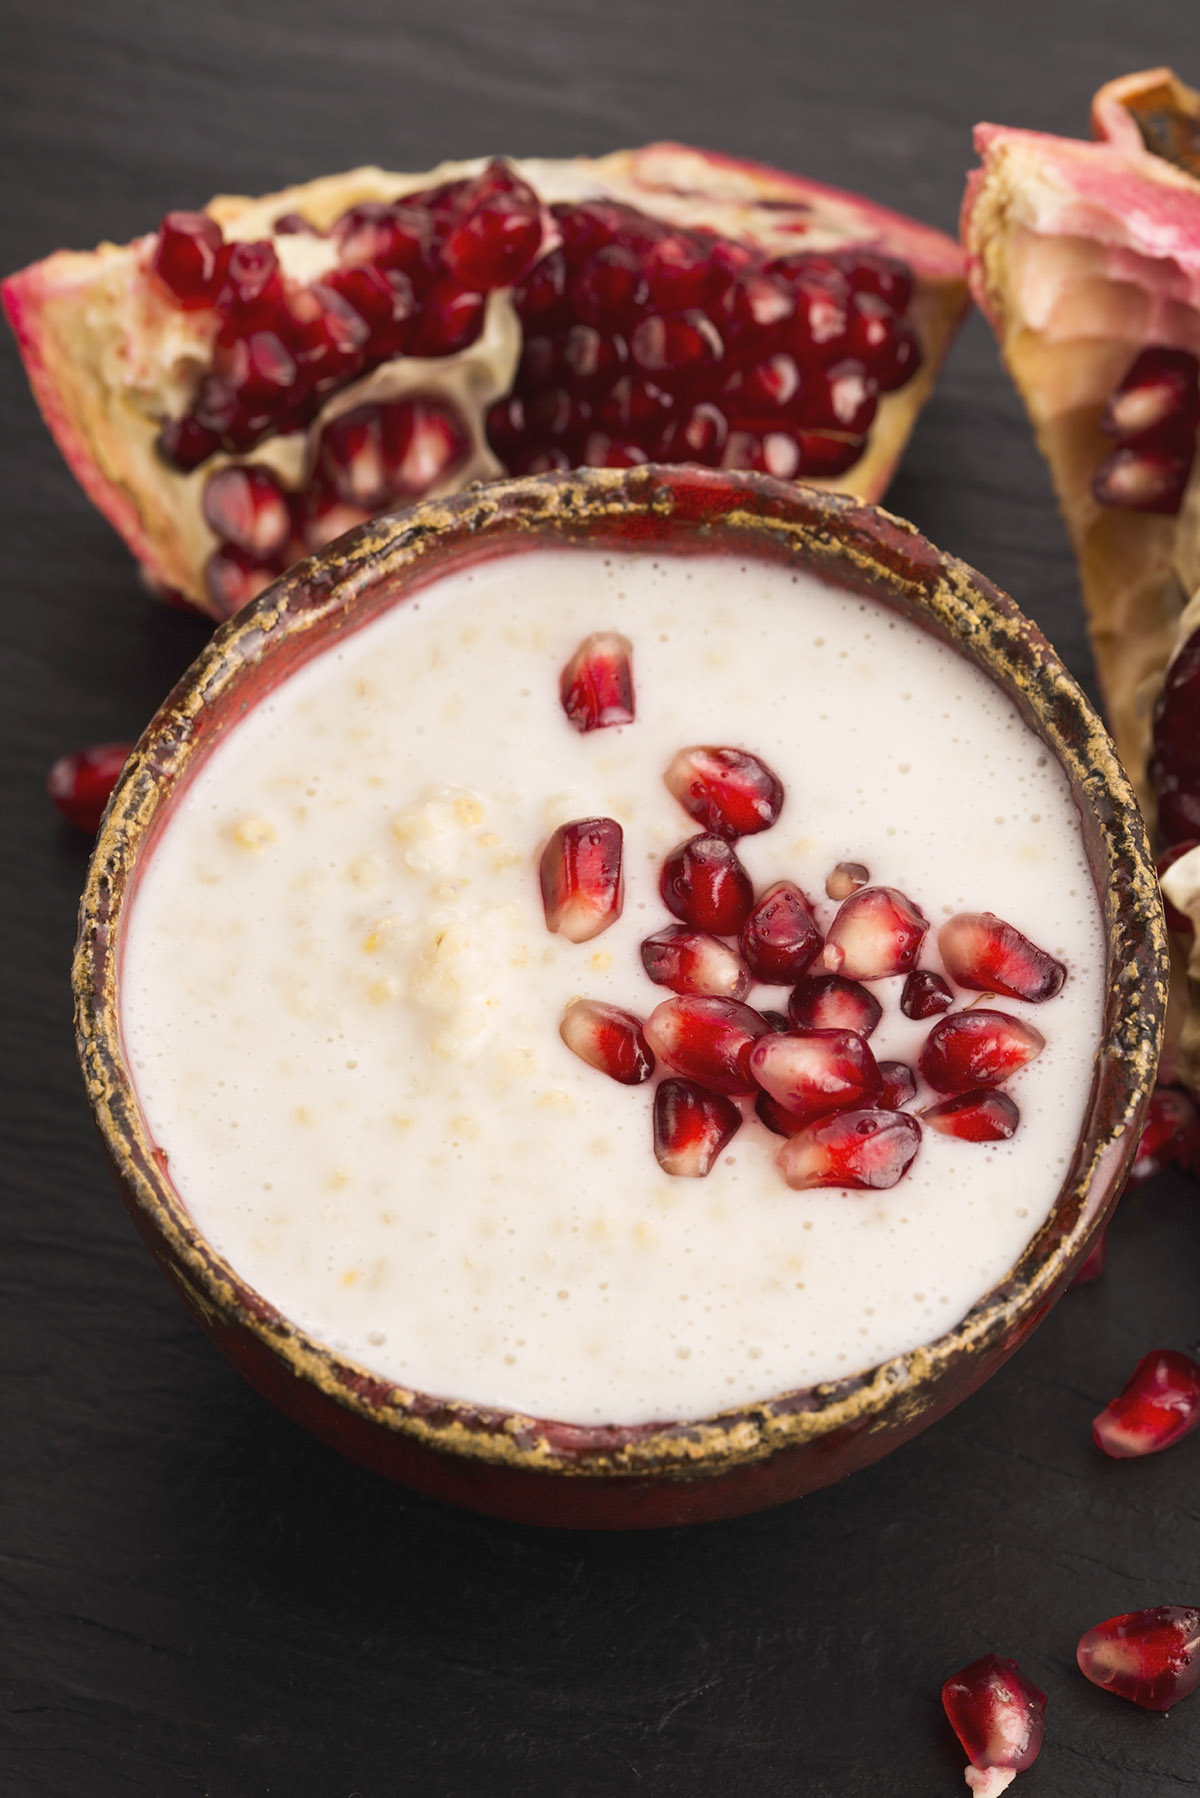 Creamy Coconut Pudding with Pomegranate Arils